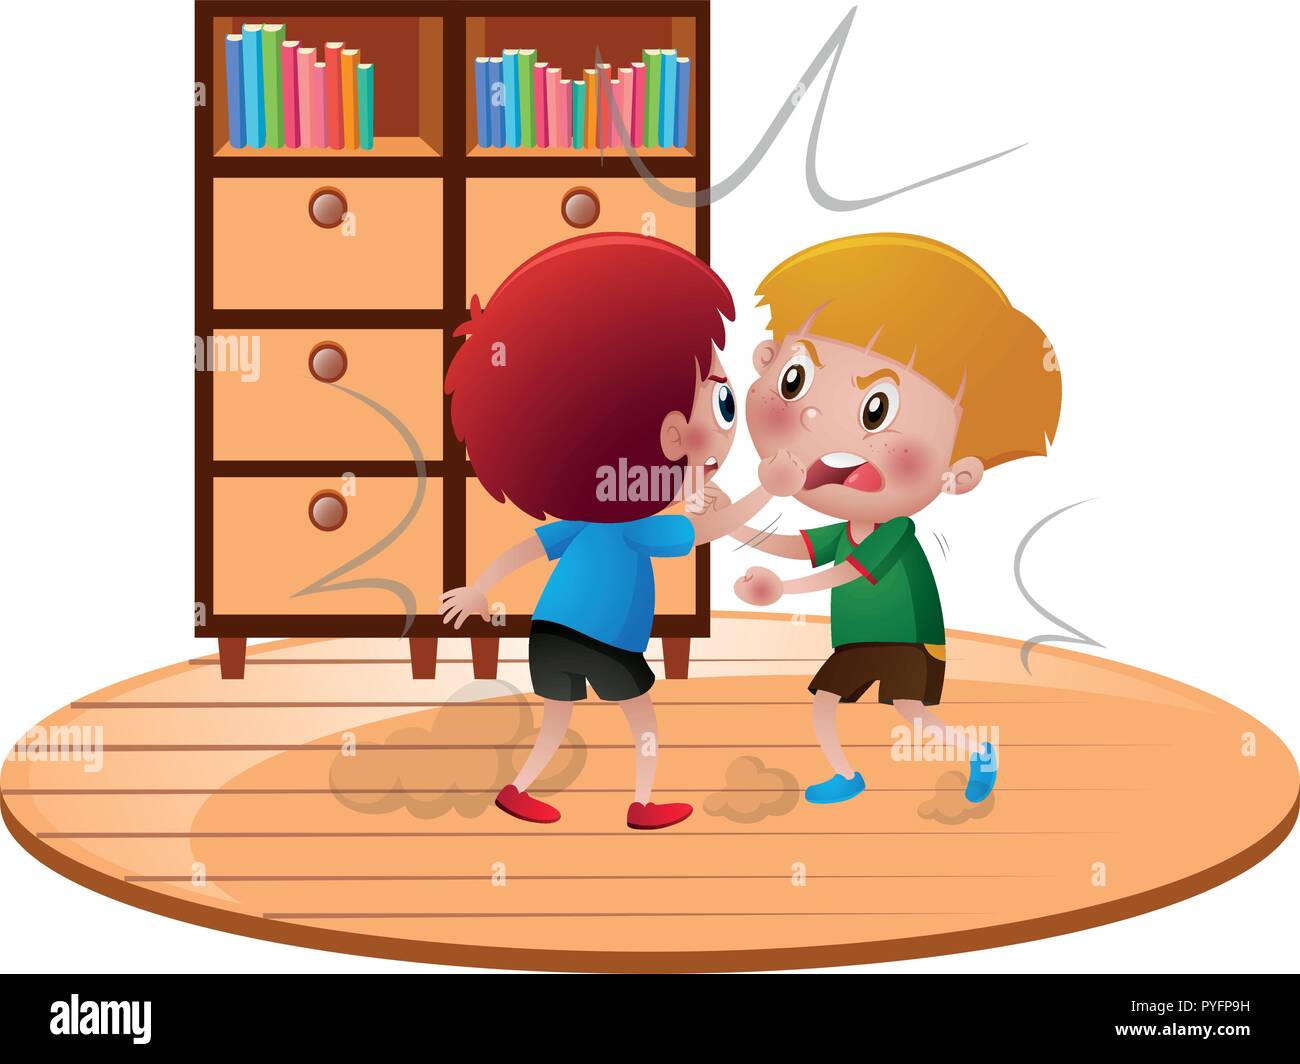 Two angry boys fighting illustration Stock Vector